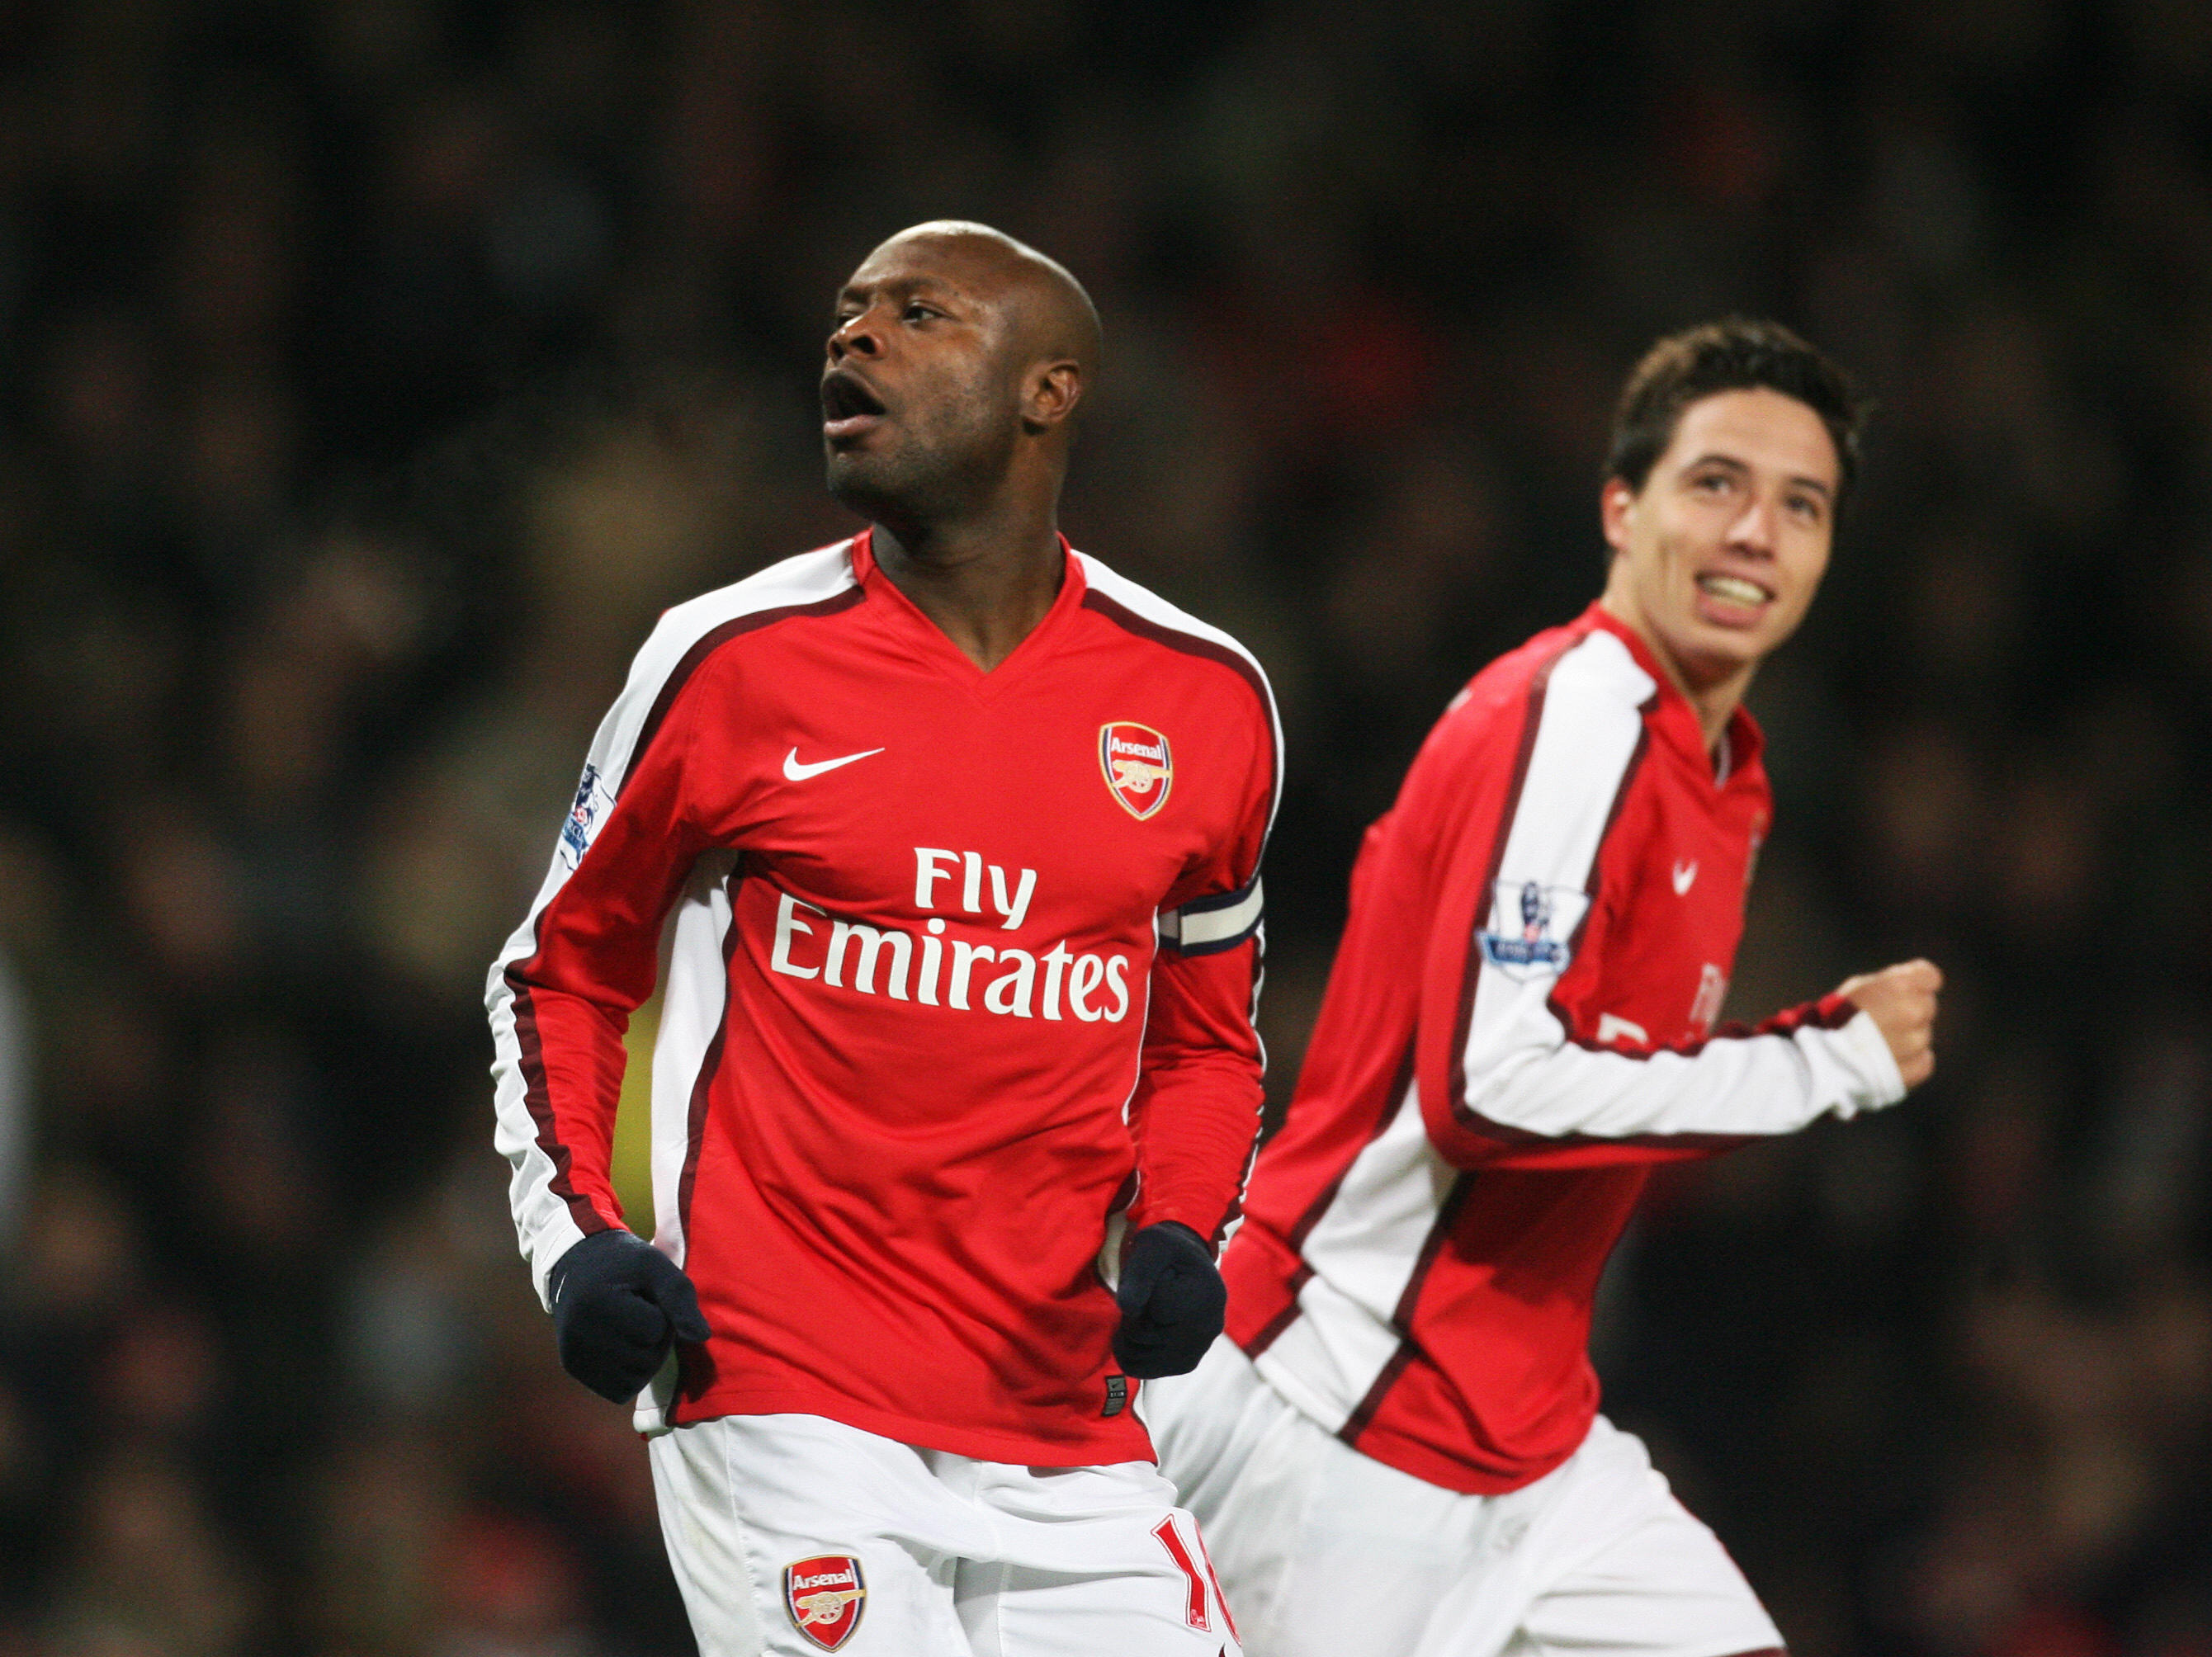 Arsenal's William Gallas celebrates scoring the goal to make it 2-1 against Tottenham Hotspur with Samir Nasri (R) during their Barclays Premiership football match at The Emirates Stadium in London, on October 29, 2008. AFP PHOTO/Chris Ratcliffe  Mobile and website use of domestic English football pictures are subject to obtaining a Photographic End User Licence from Football DataCo Ltd Tel : +44 (0) 207 864 9121 or e-mail accreditations@football-dataco.com - applies to Premier and Football League matches. (Photo credit should read CHRIS RATCLIFFE/AFP/Getty Images)